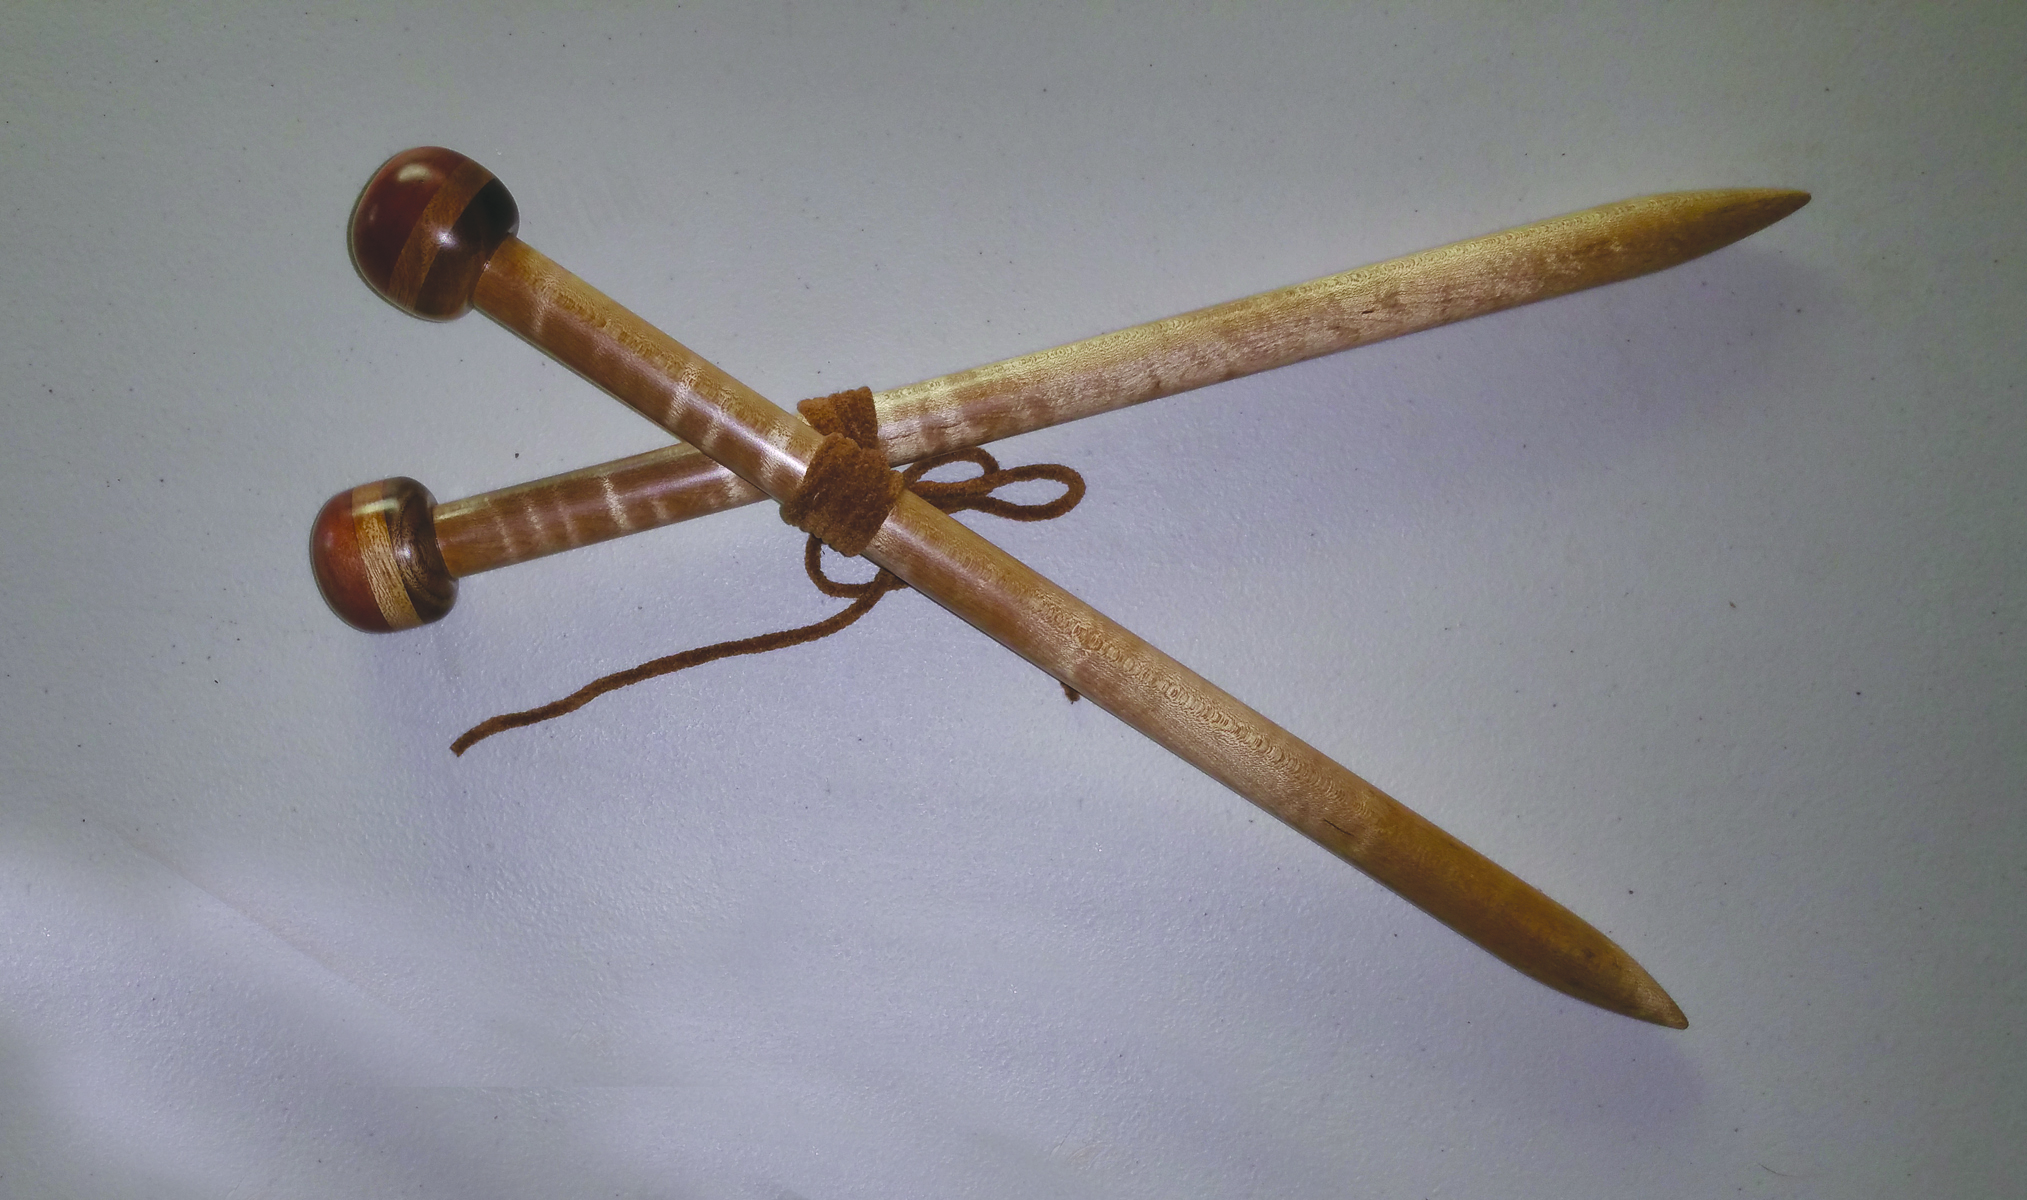 Hand-Crafted wooden knitting needles created by Gerry Ludlow